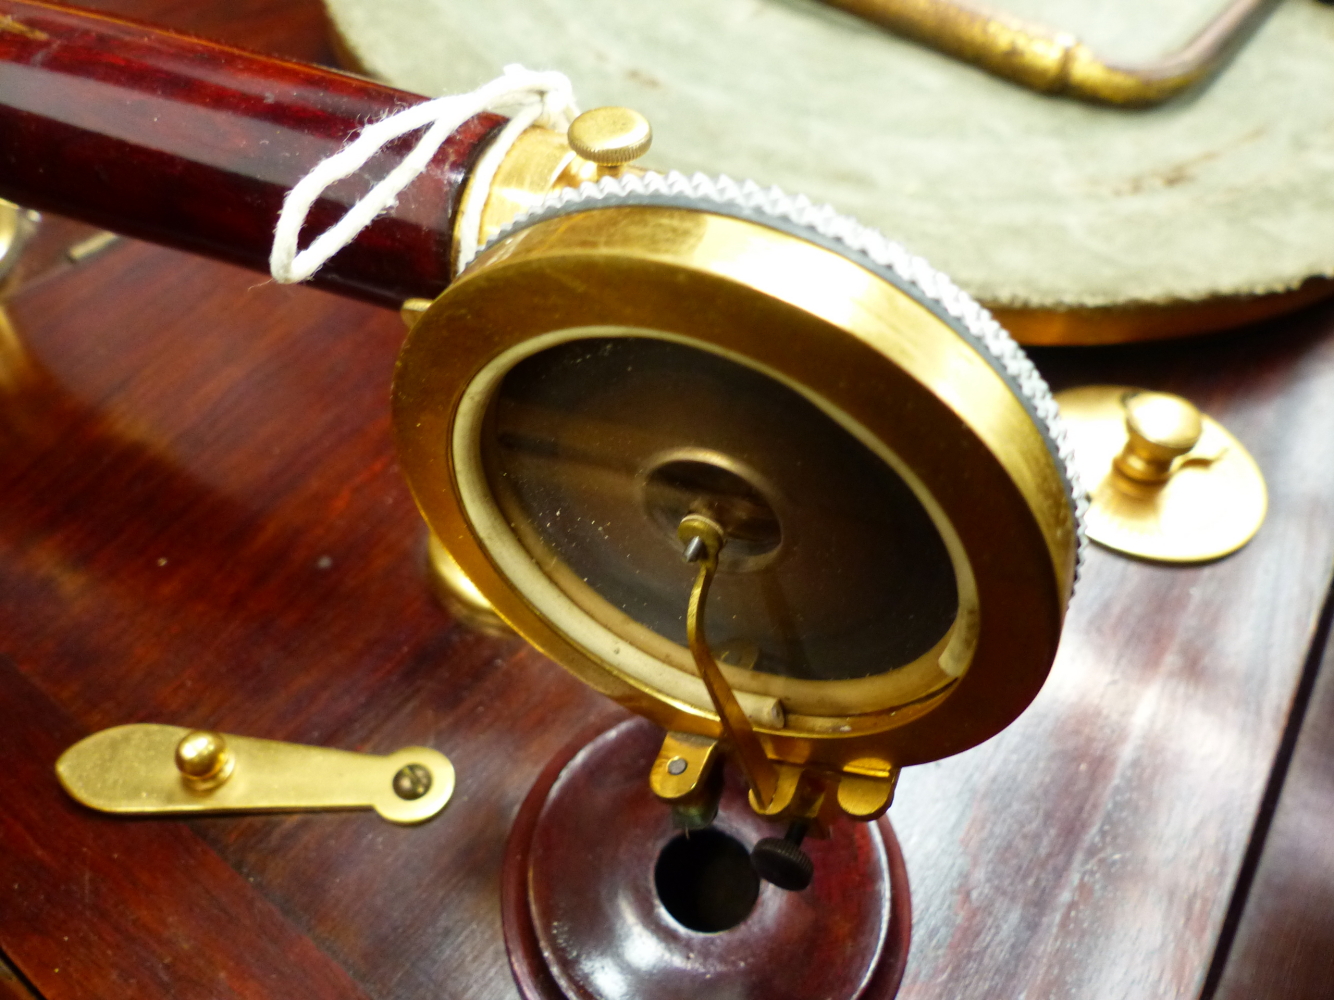 A MAHOGANY CASED VESPER WIND UP GRAMOPHONE, THE GILT MOUNTED MAHOGANY PLAYING ARM AND TURNTABLE - Image 6 of 9